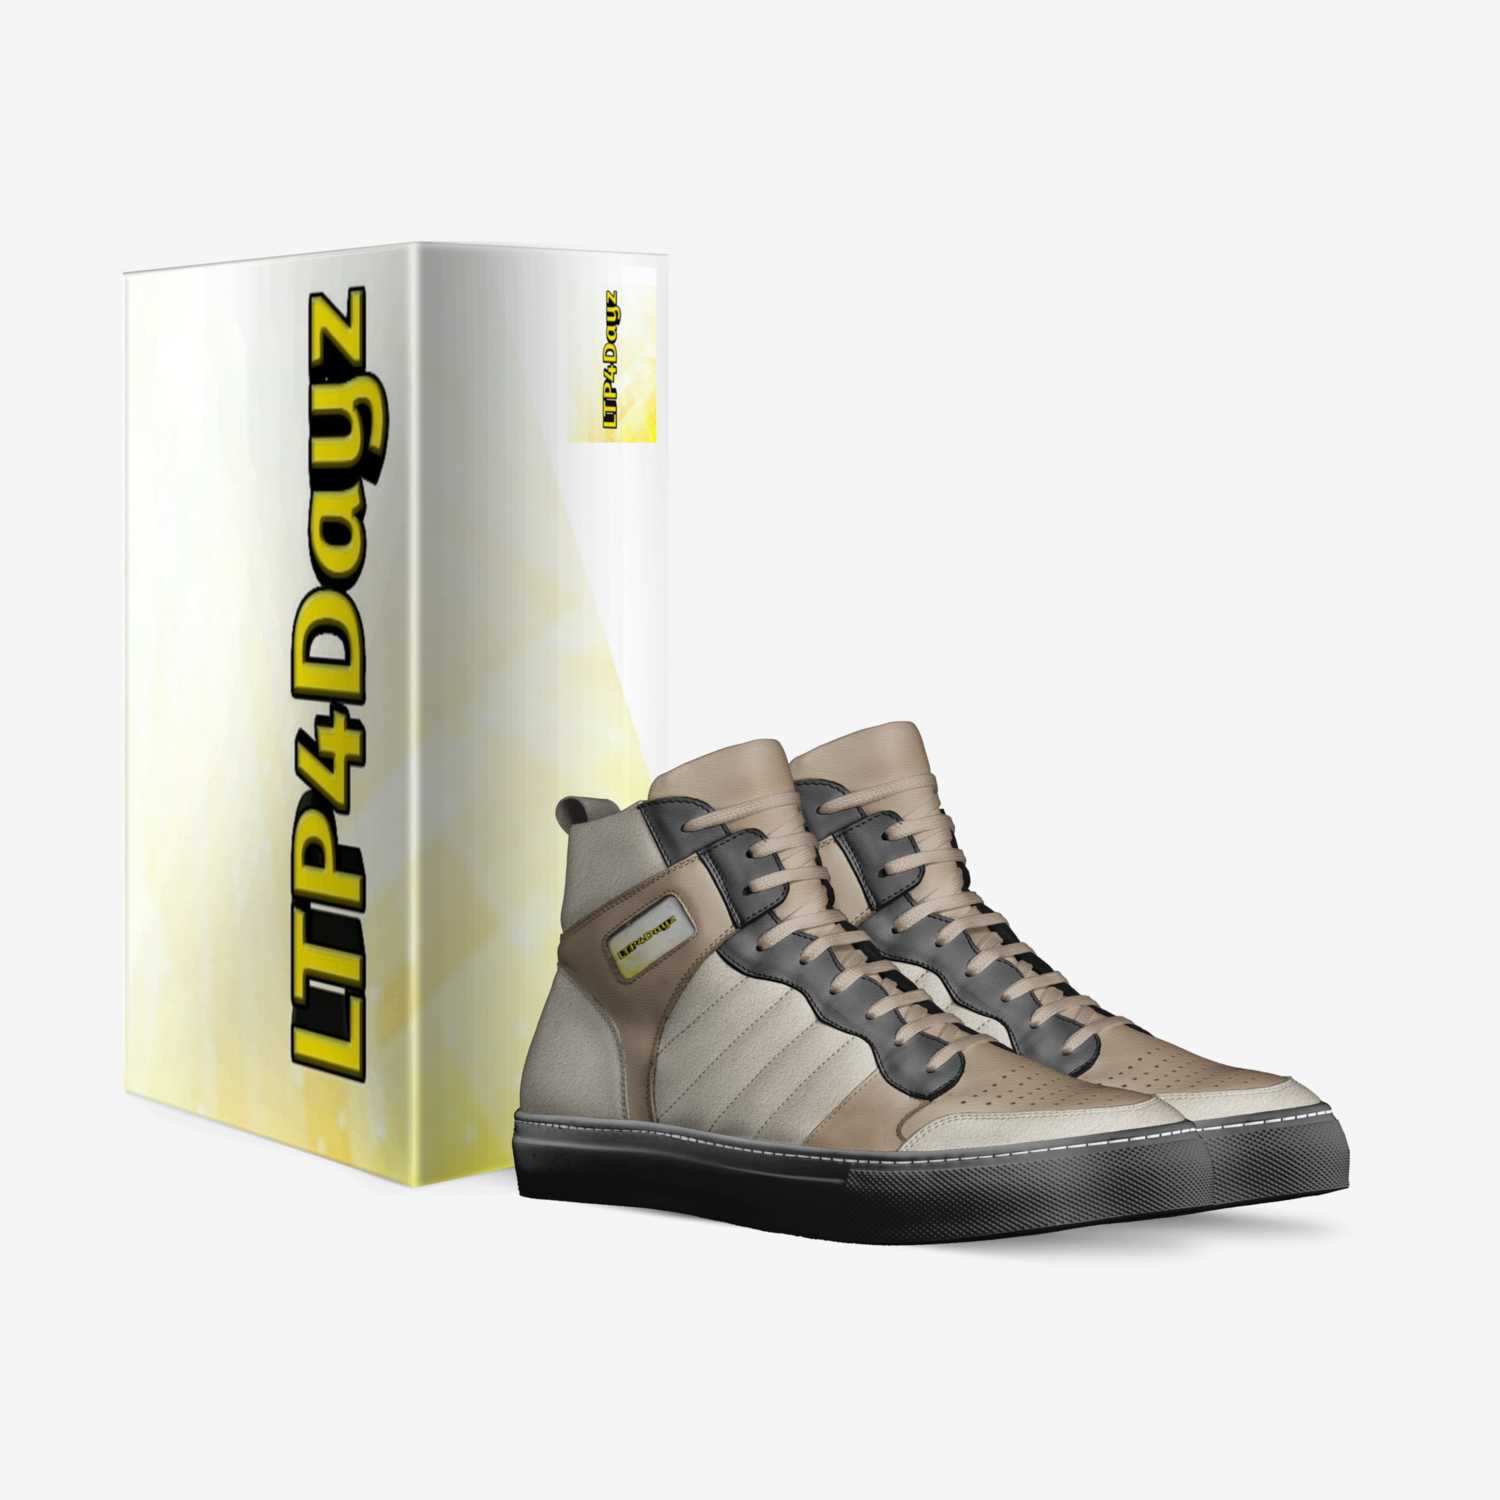 LTP 18 custom made in Italy shoes by Logan Presley | Box view